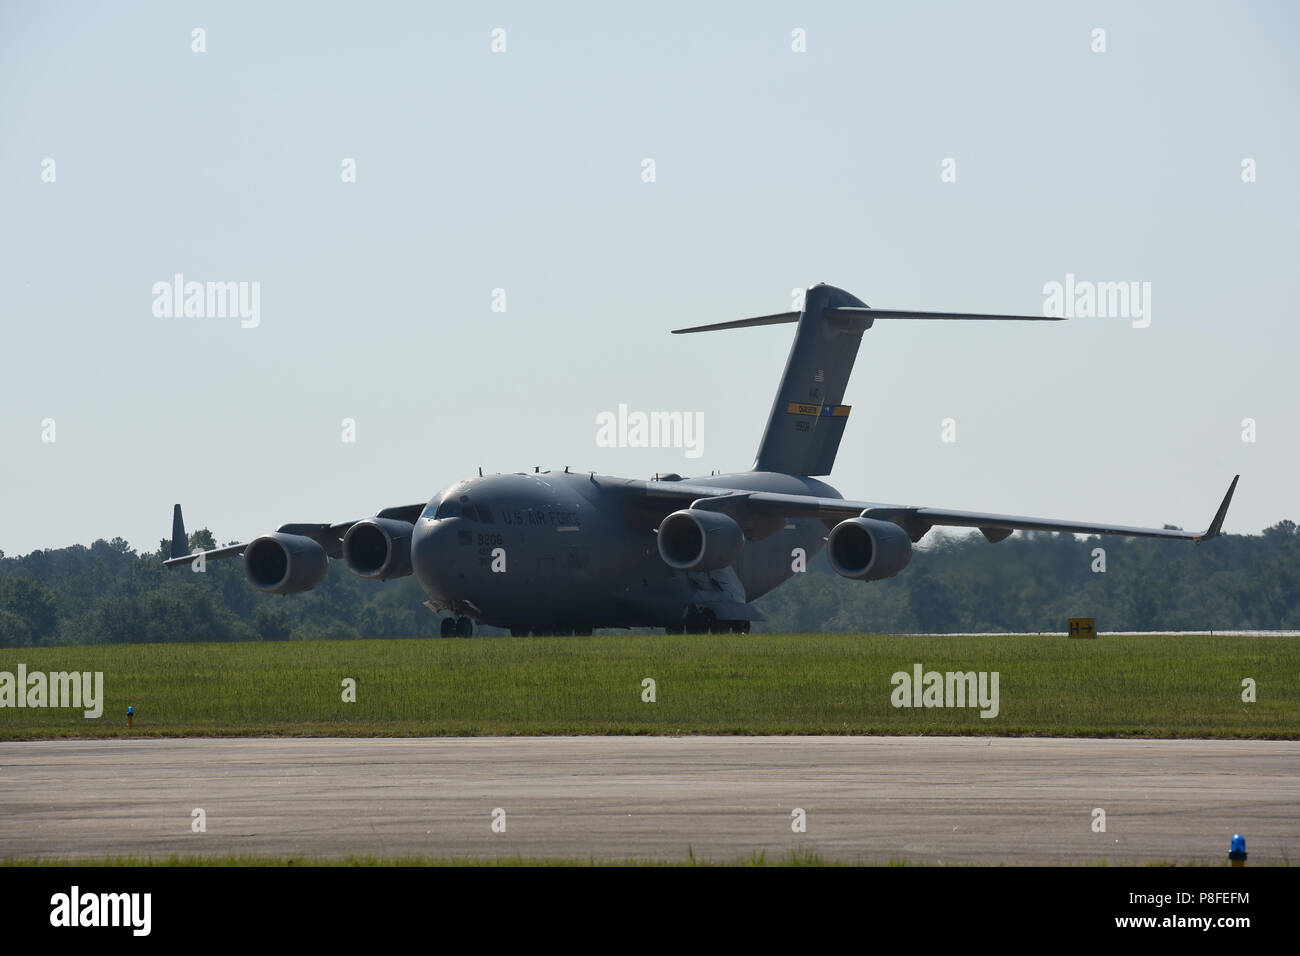 U.S. Airmen of the 169th Fighter Wing of the South Carolina Air National Guard at McEntire Joint National Guard Base, South Carolina, depart in a U.S. Air Force C-17 Globemaster III large transport aircraft from Joint Base Charleston, South Carolina, July 11, 2018. The South Carolina Air National Guard’s 169th Fighter Wing is deploying nearly 300 Airmen and approximately a dozen F-16 Block 52 Fighting Falcon fighter jets to the 407th Air Expeditionary Group in Southwest Asia in support of an Air Expeditionary Force rotation. (U.S. Air National Guard photo by Senior Airman Ashleigh S. Pavelek) Stock Photo